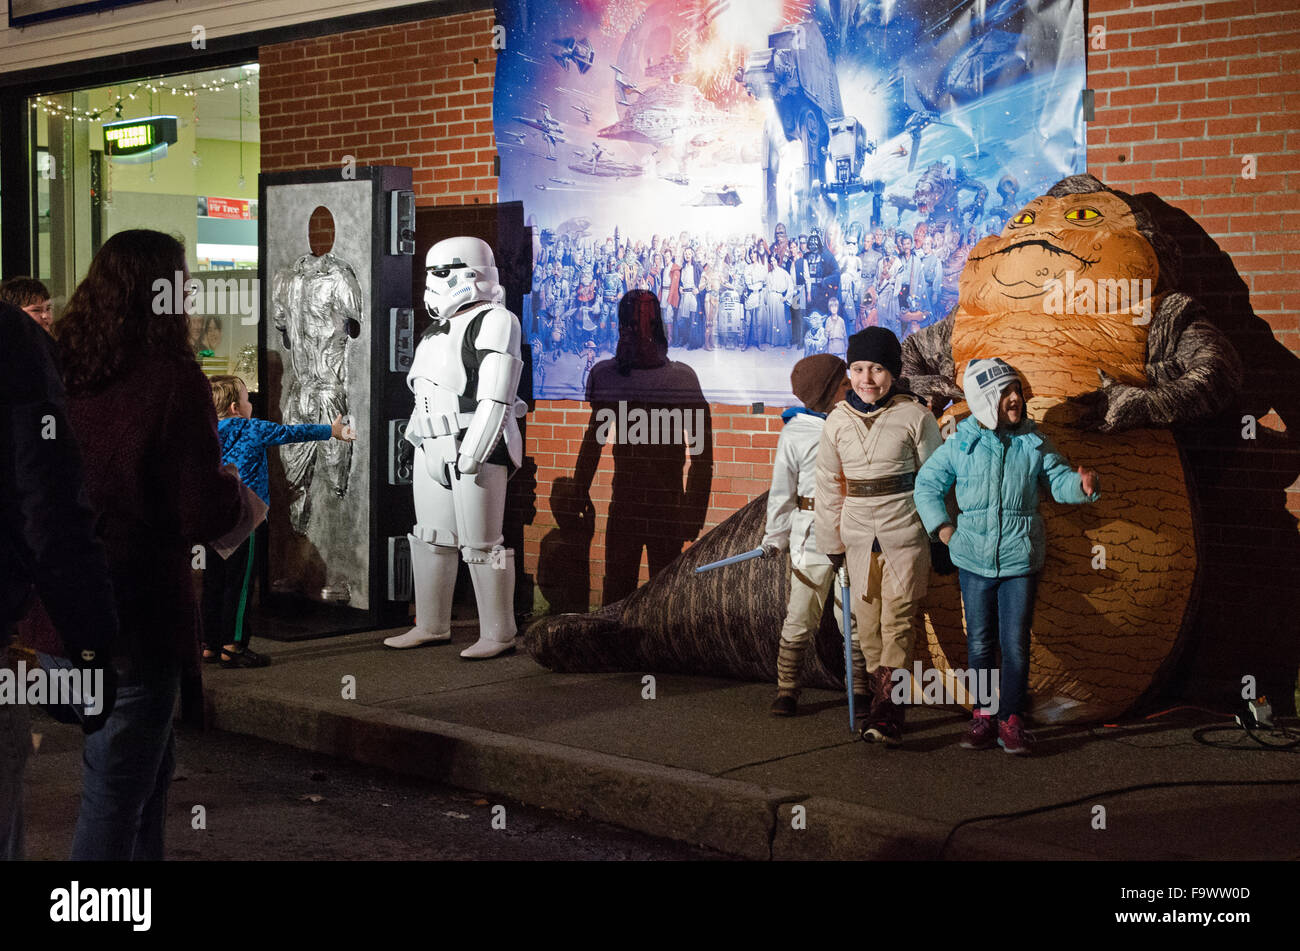 Bar Harbor, Maine, USA. 18th December, 2015. Photo ops at the opening night of Star Wars: The Force Awakens at the historic Criterion Theater include a sculpture of Han Solo frozen in carbonite and an inflatable Jabba the Hutt.  Credit: Jennifer Booher/Alamy Live News Stock Photo